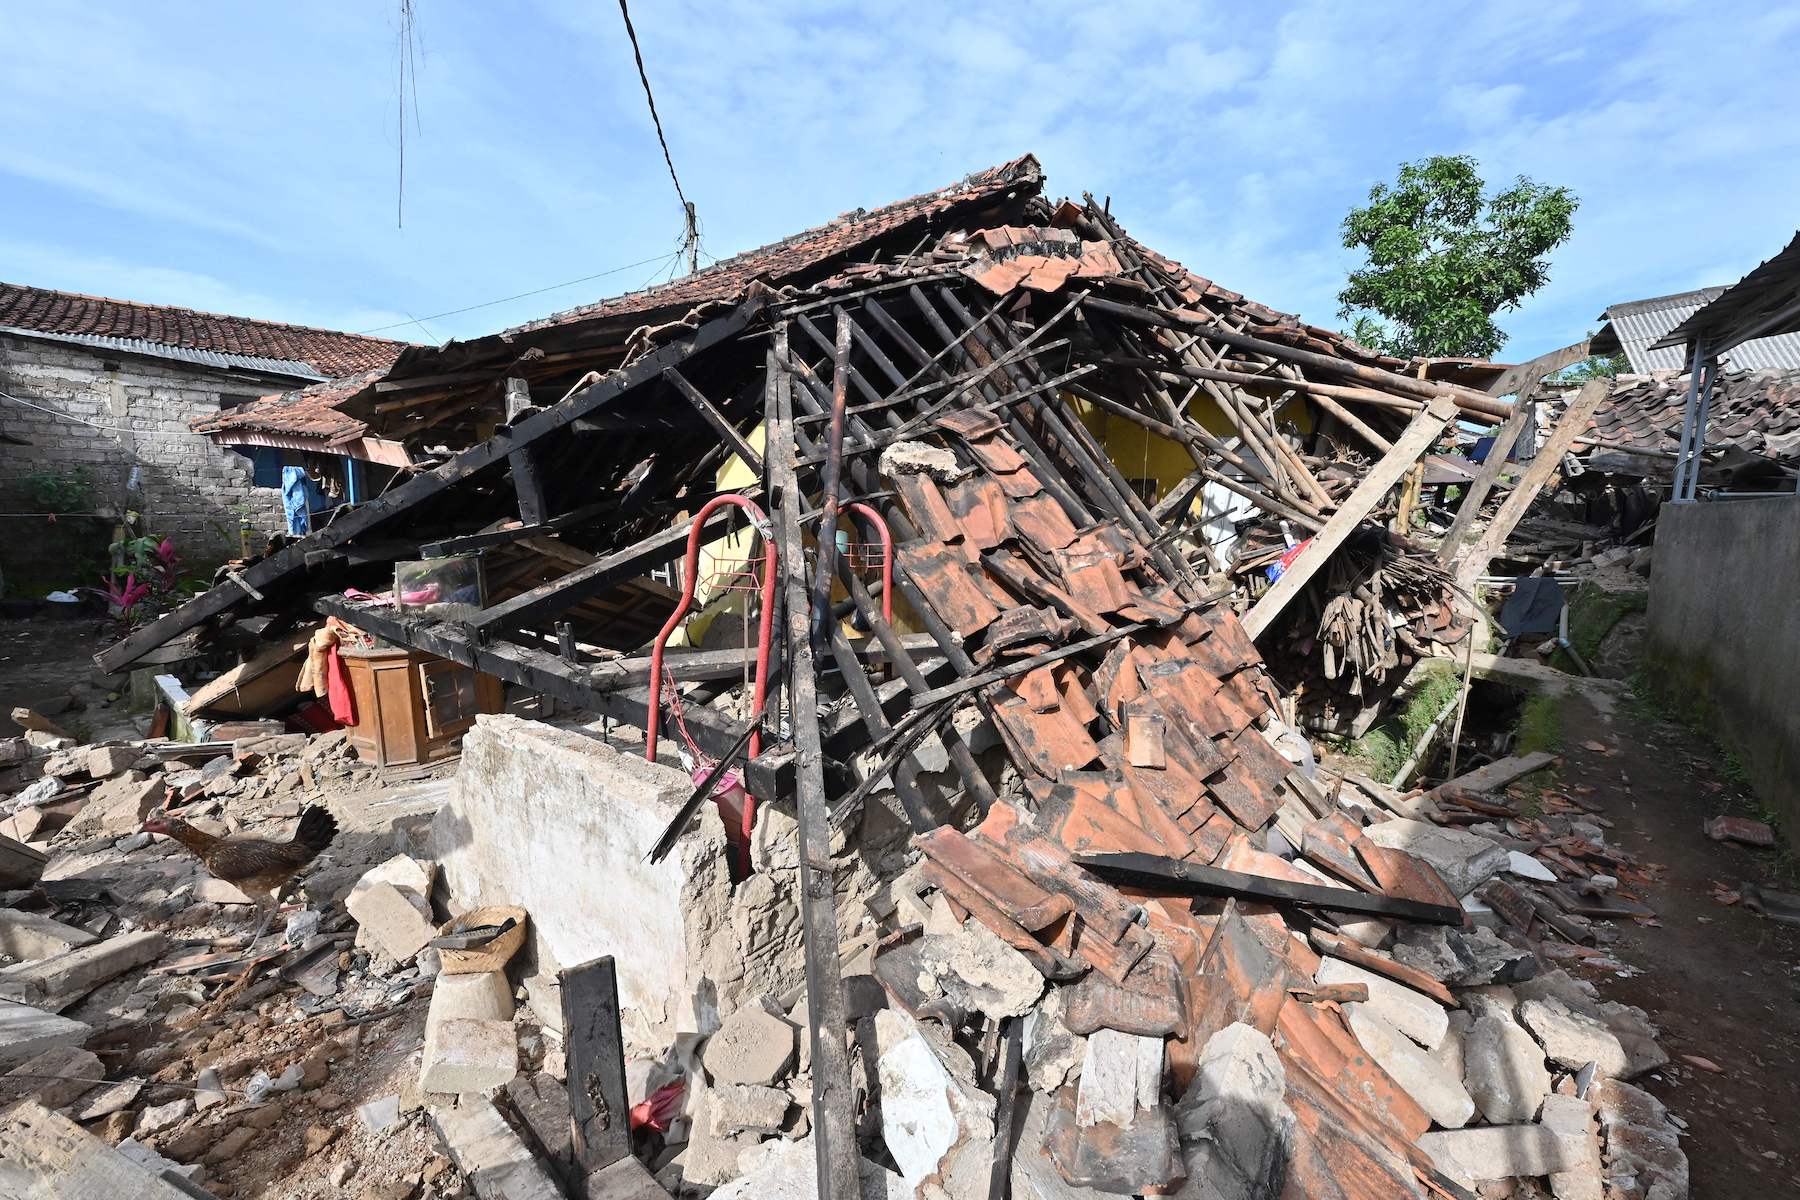 A Magnitude 5.6 Earthquake Struck Indonesia, Killing At Least 271 People And Injuring More Than 1,000